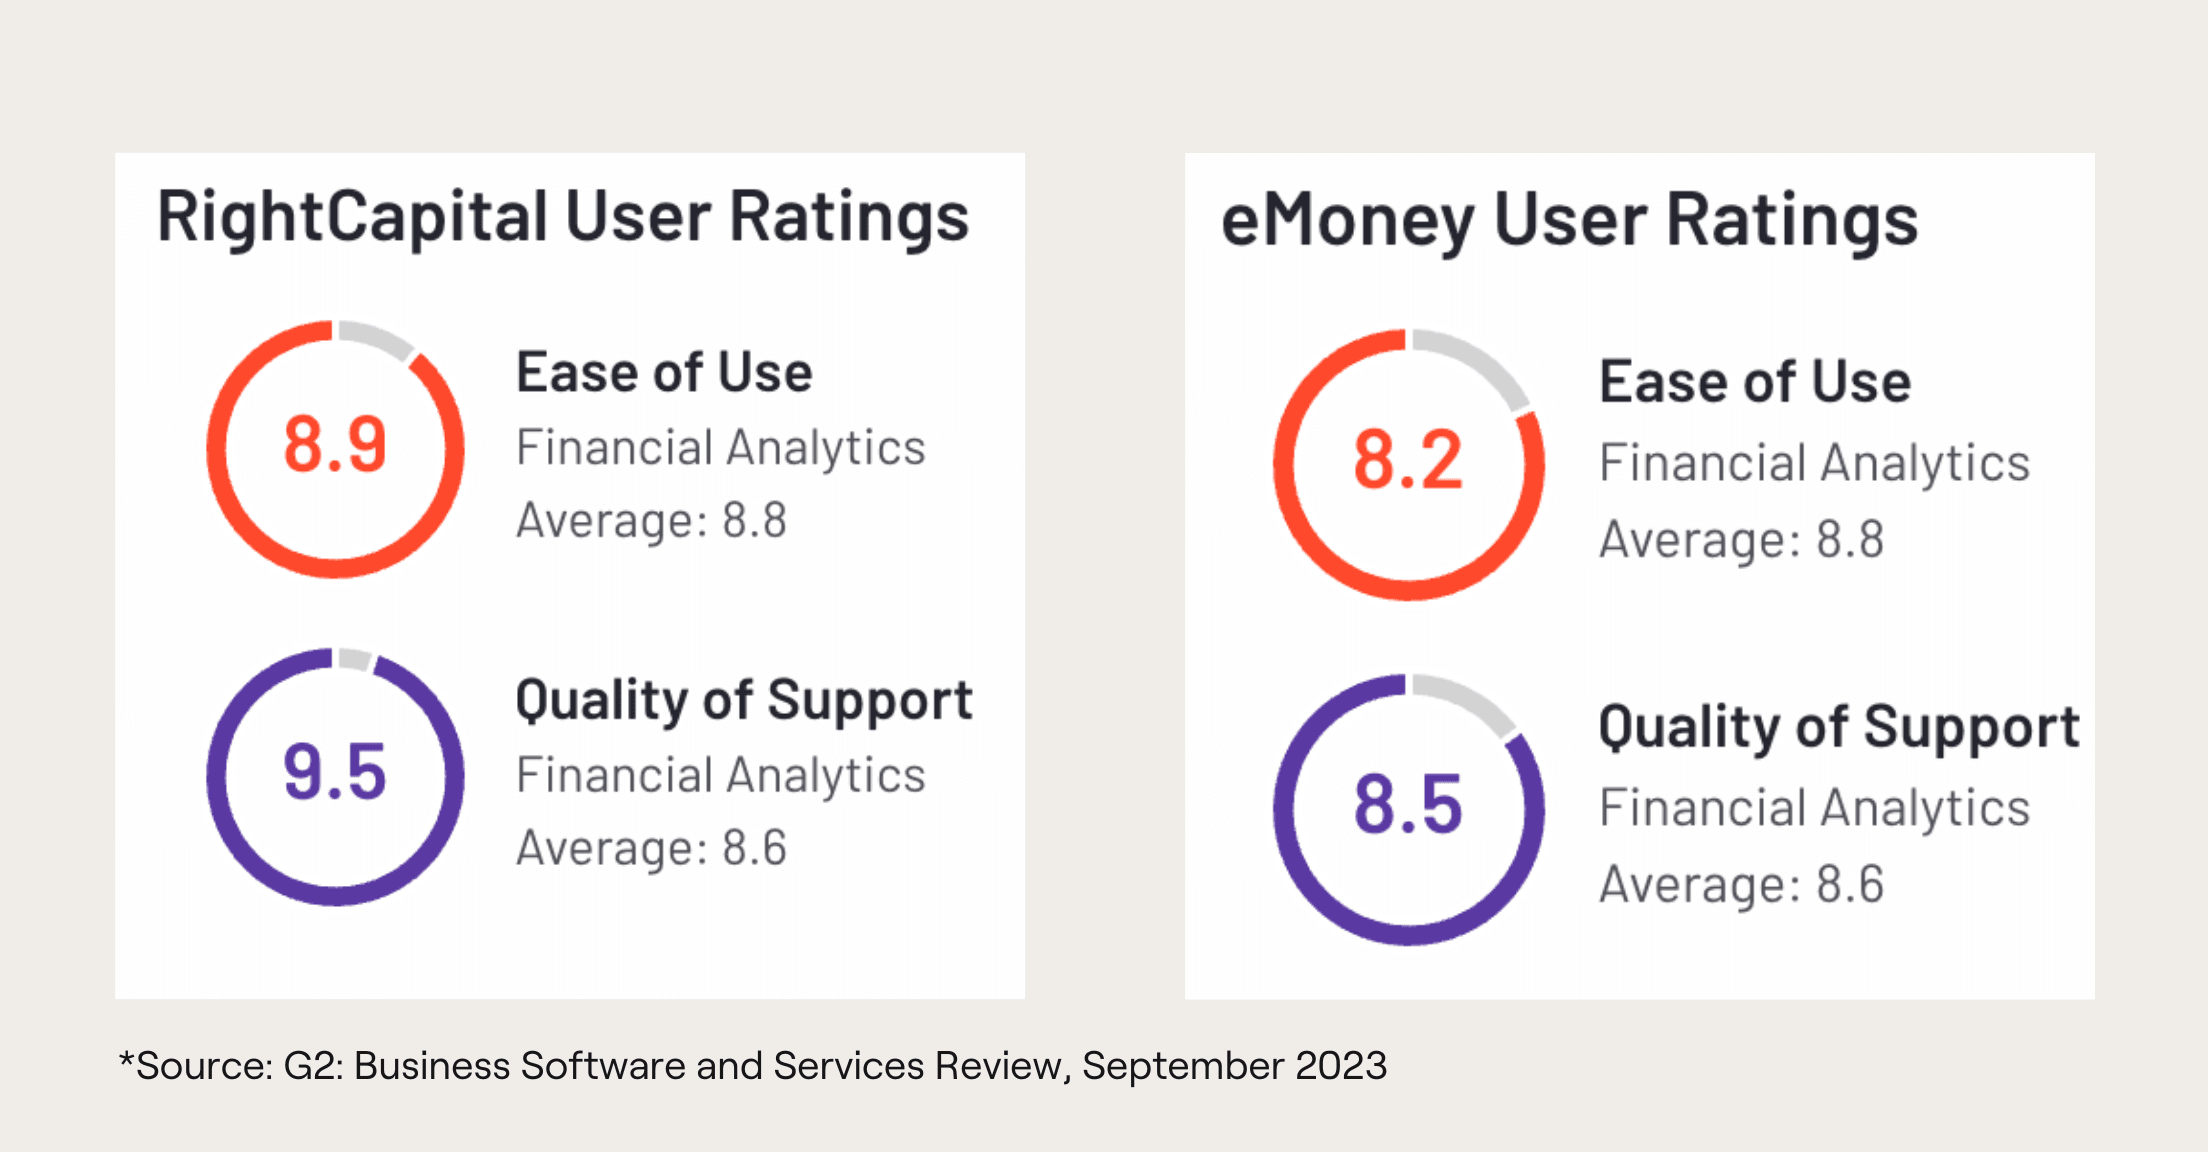 G2 Ratings of RightCapital and eMoney showing a higher rating in both Ease of Use and Quality of Support for RightCapital over eMoney